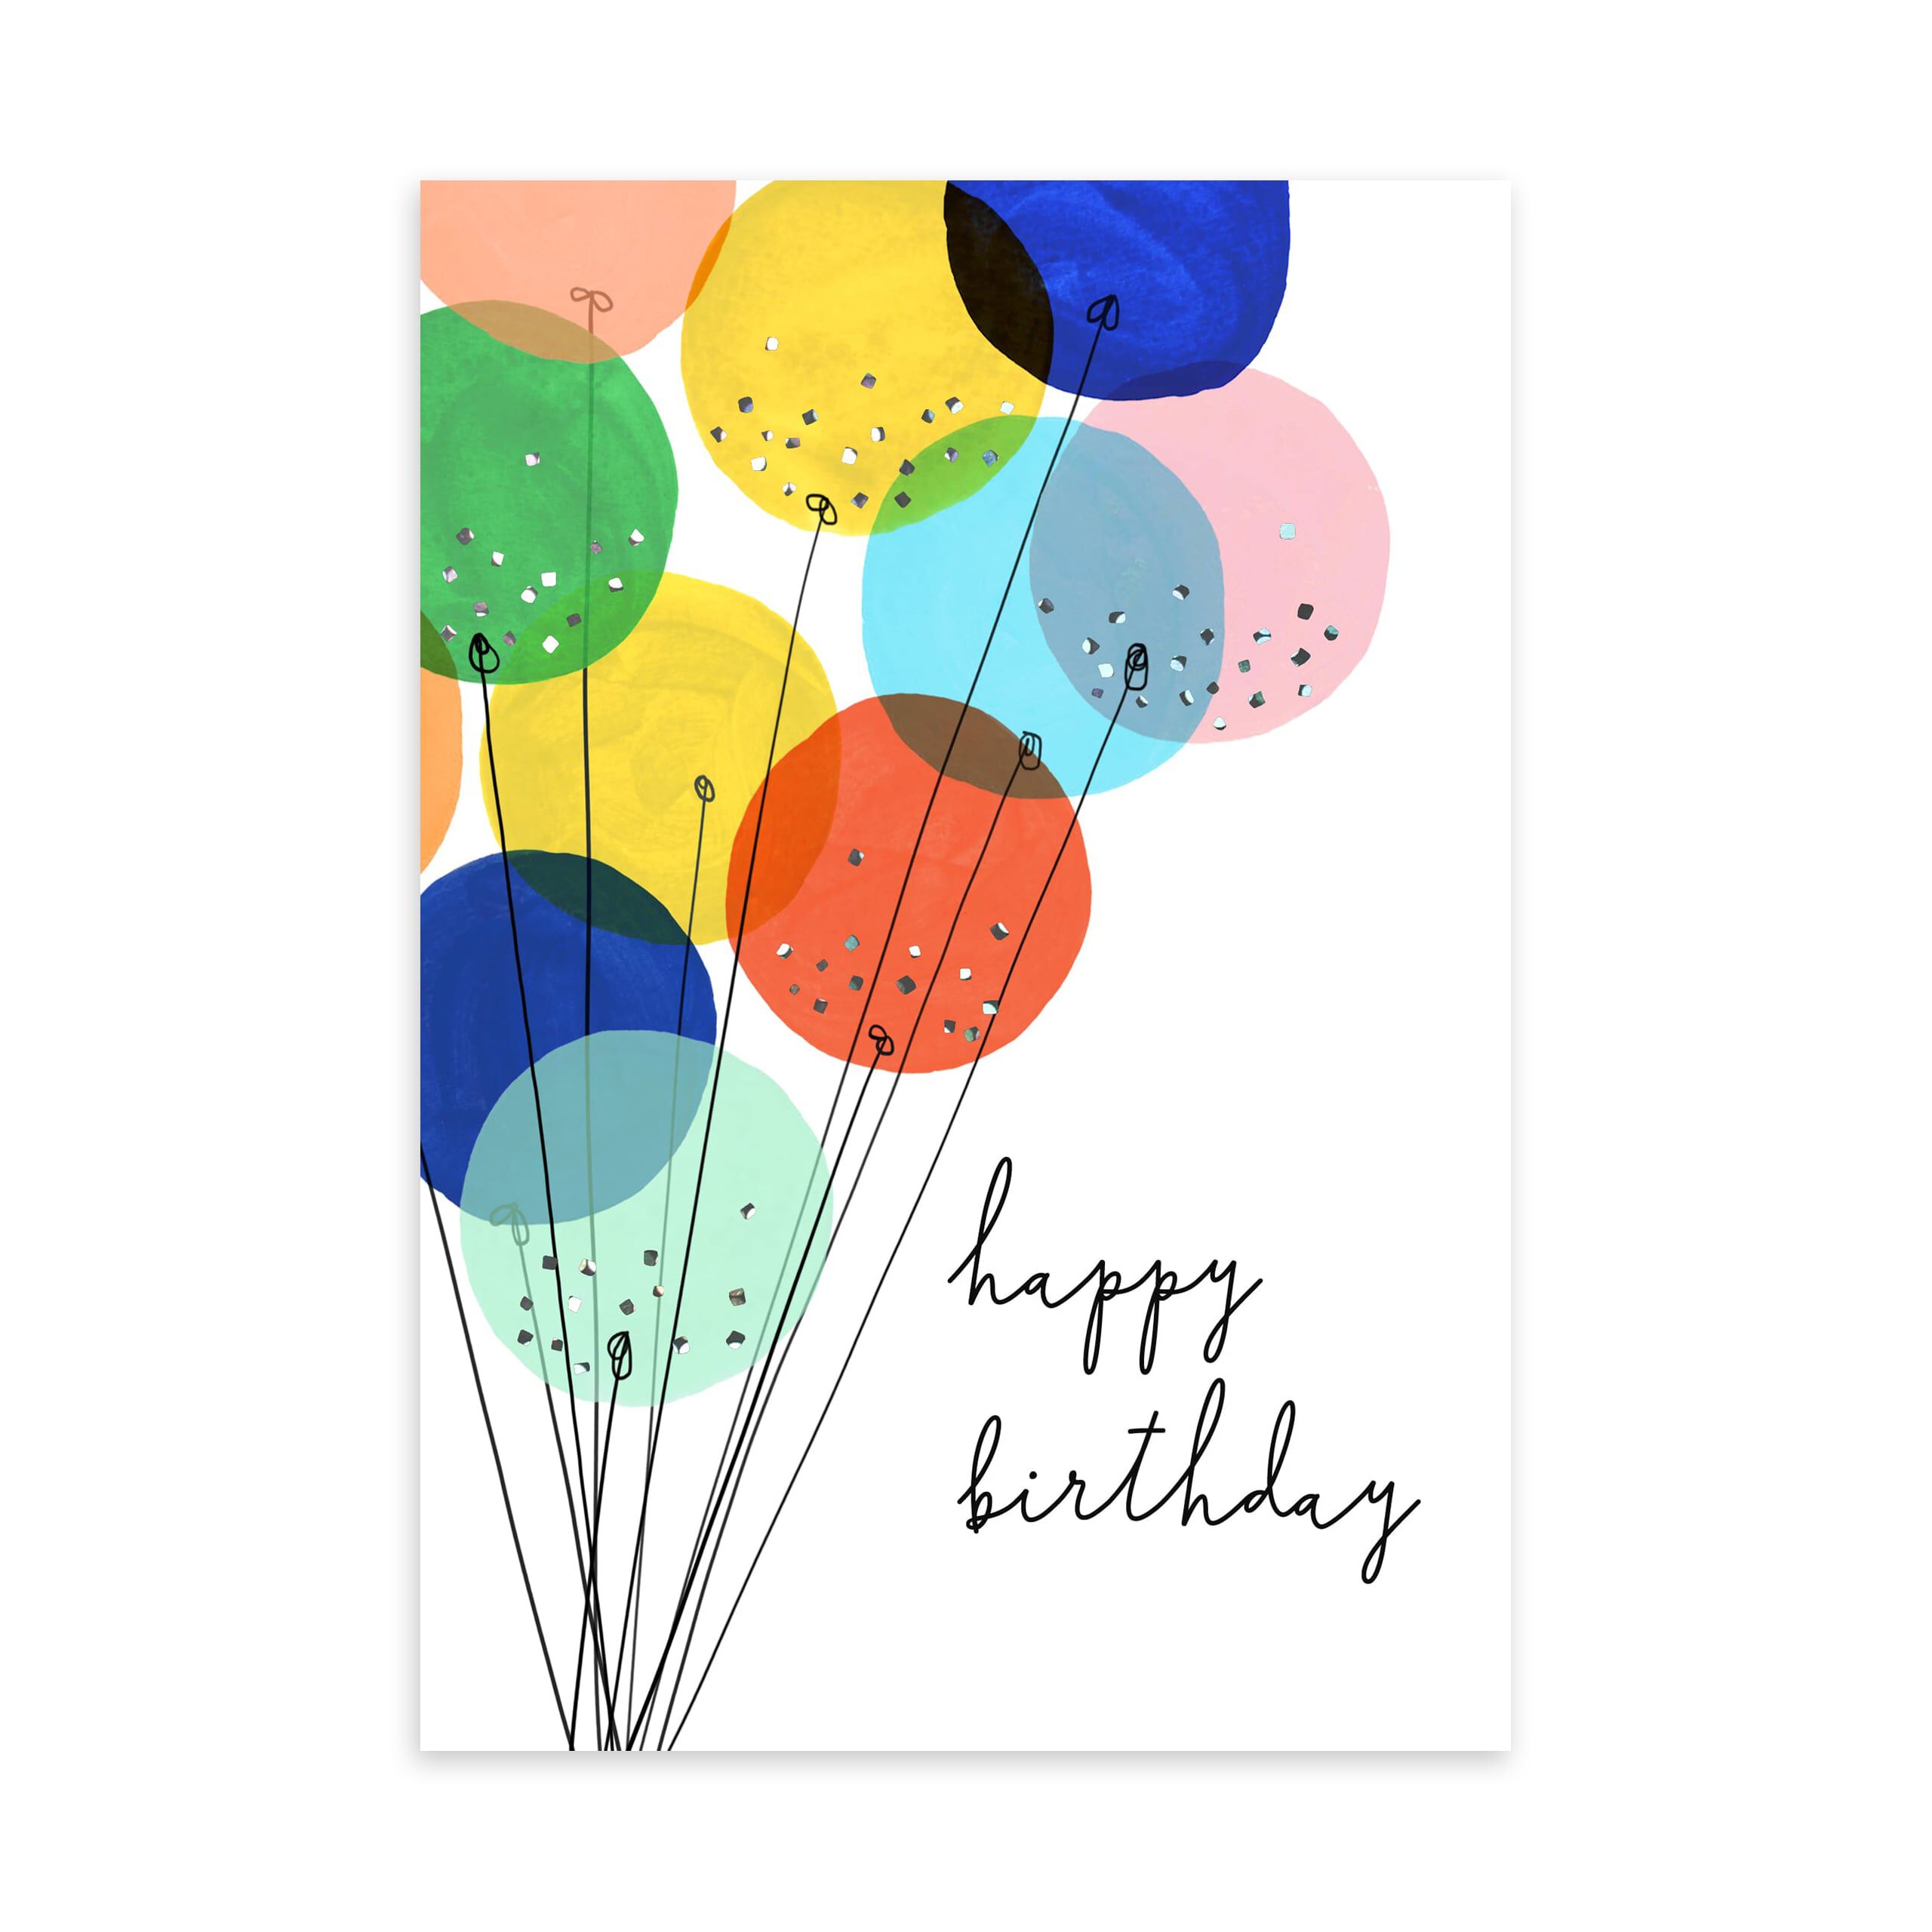 Pack of 25 Greeting Cards Hallmark Business Birthday Card for Employees Gold and Navy